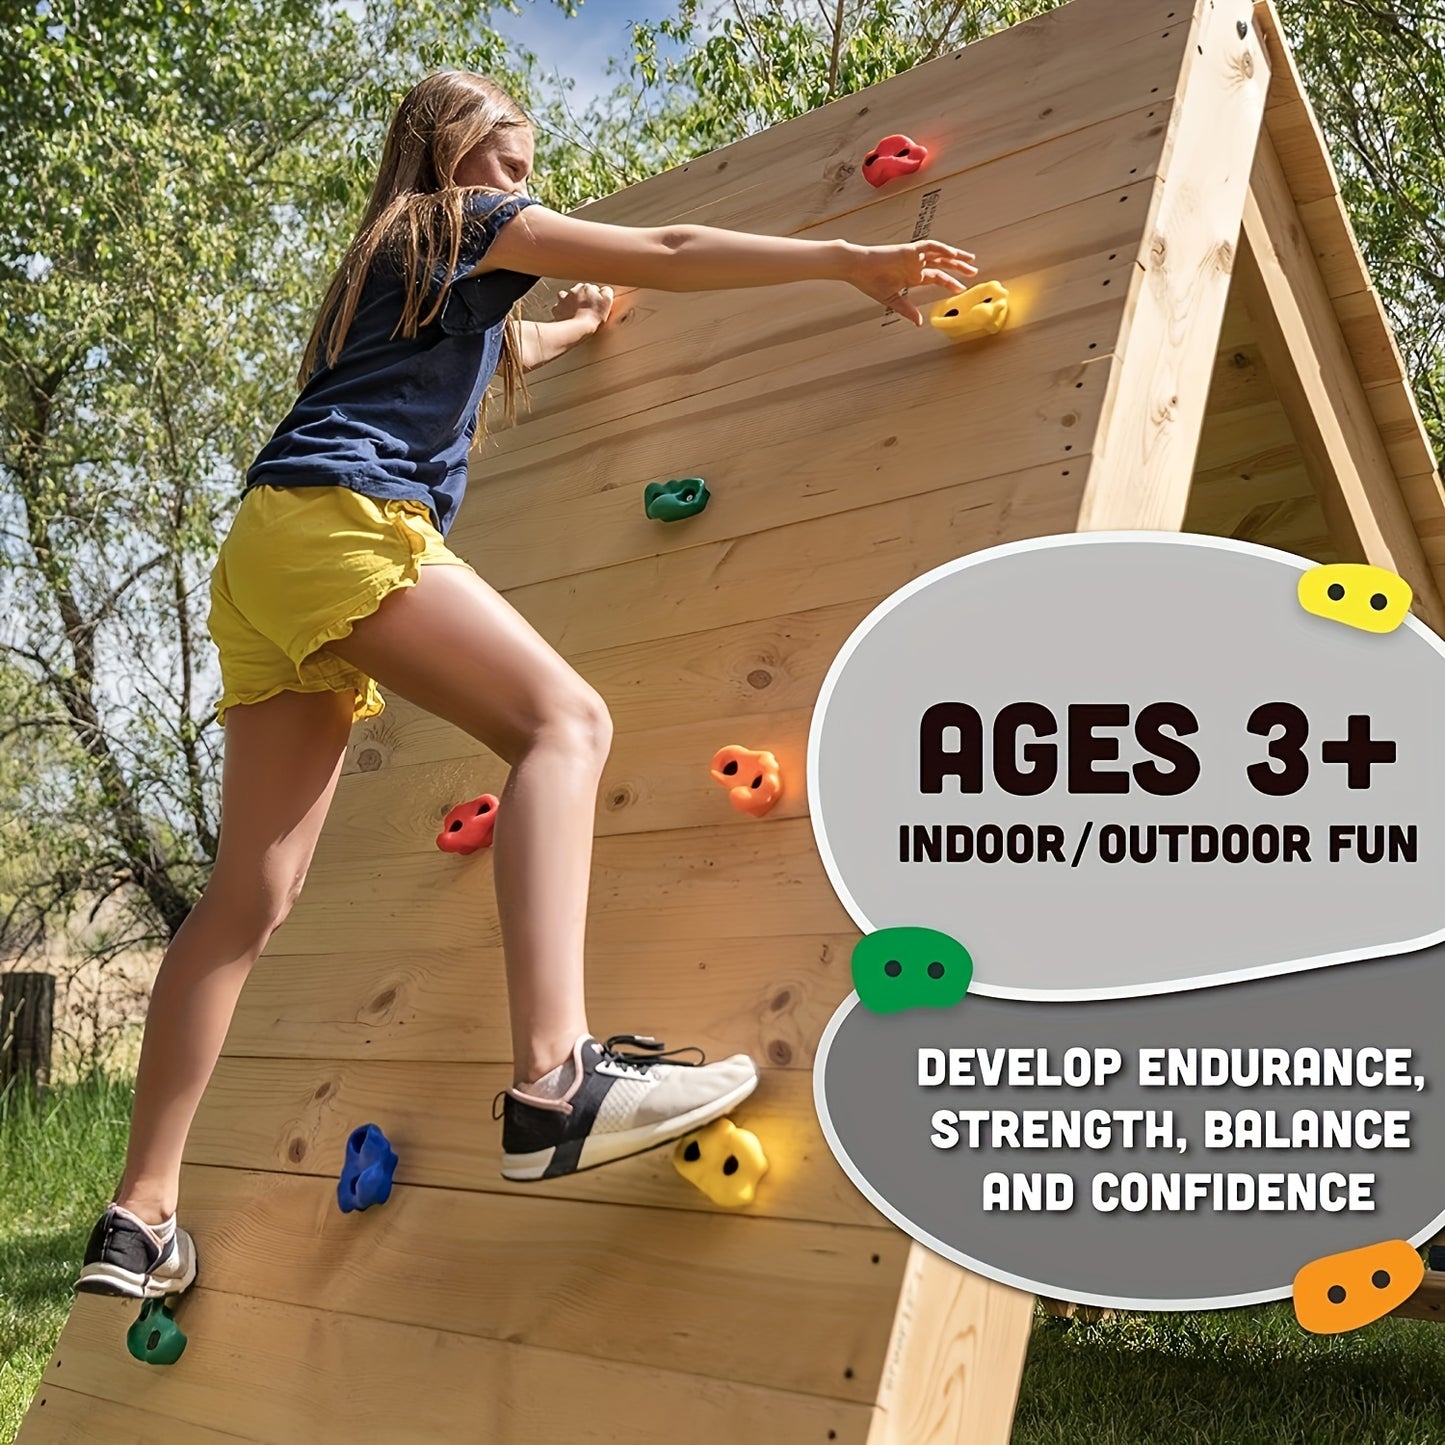 15pcs/set Durable Rock Climbing Holds with Mounting Hardware for Indoor and Outdoor Playgrounds - Enhance Strength, Balance, and Coordination Bee's to Find